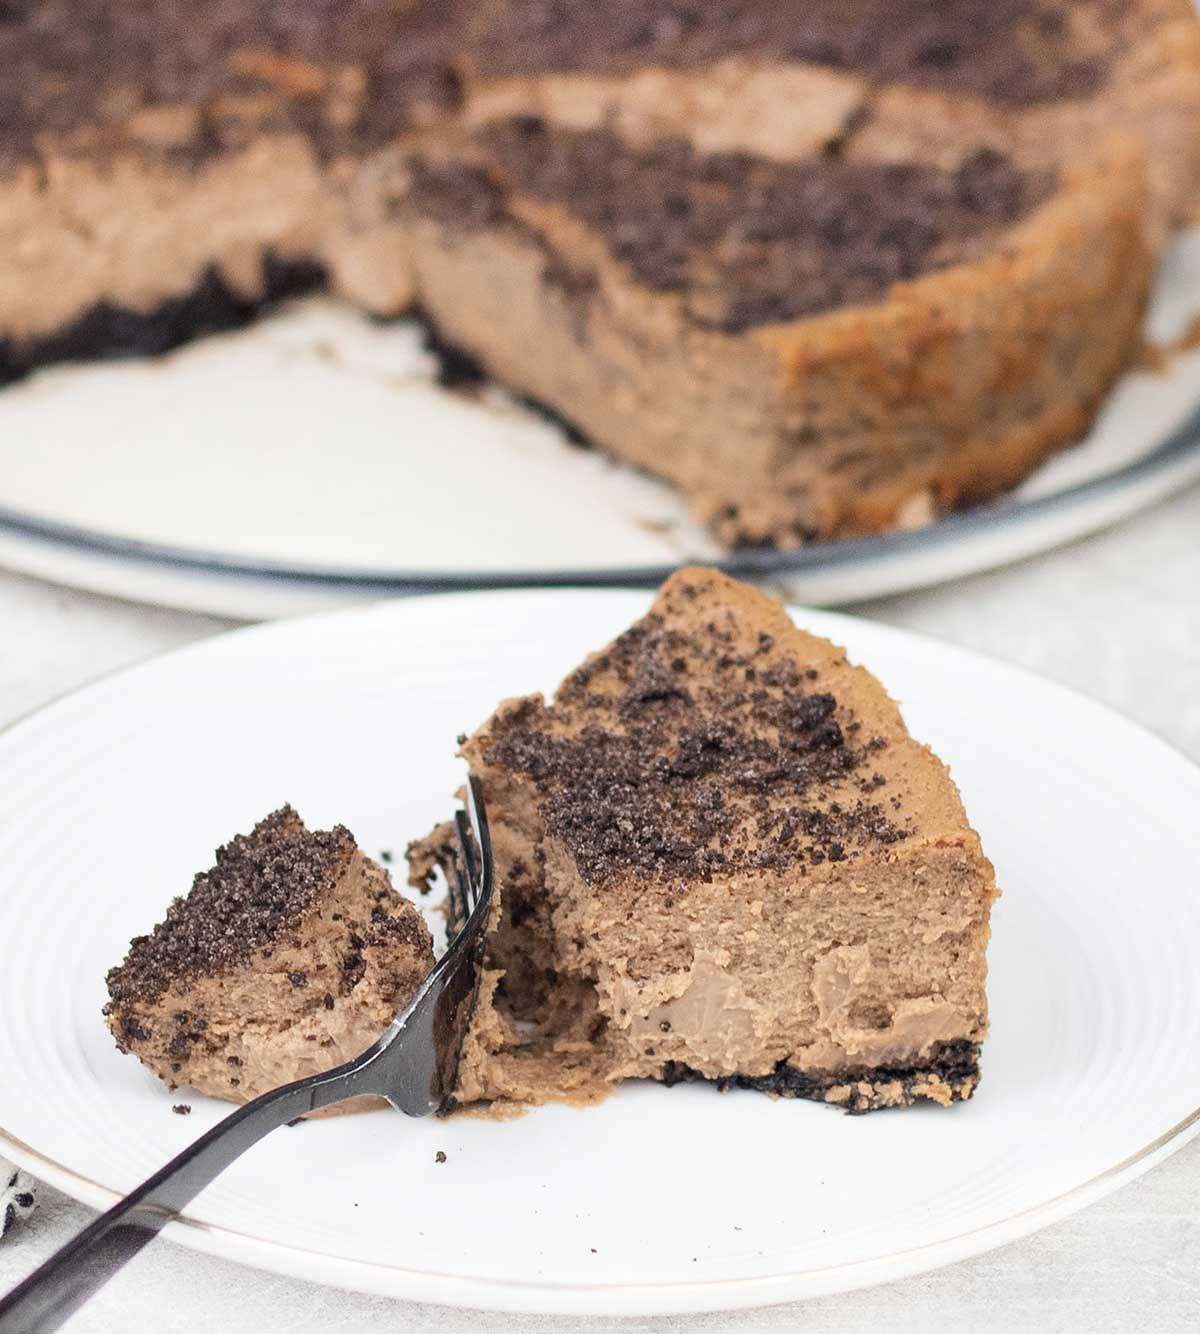 Cut the baked chocolate cheesecake.